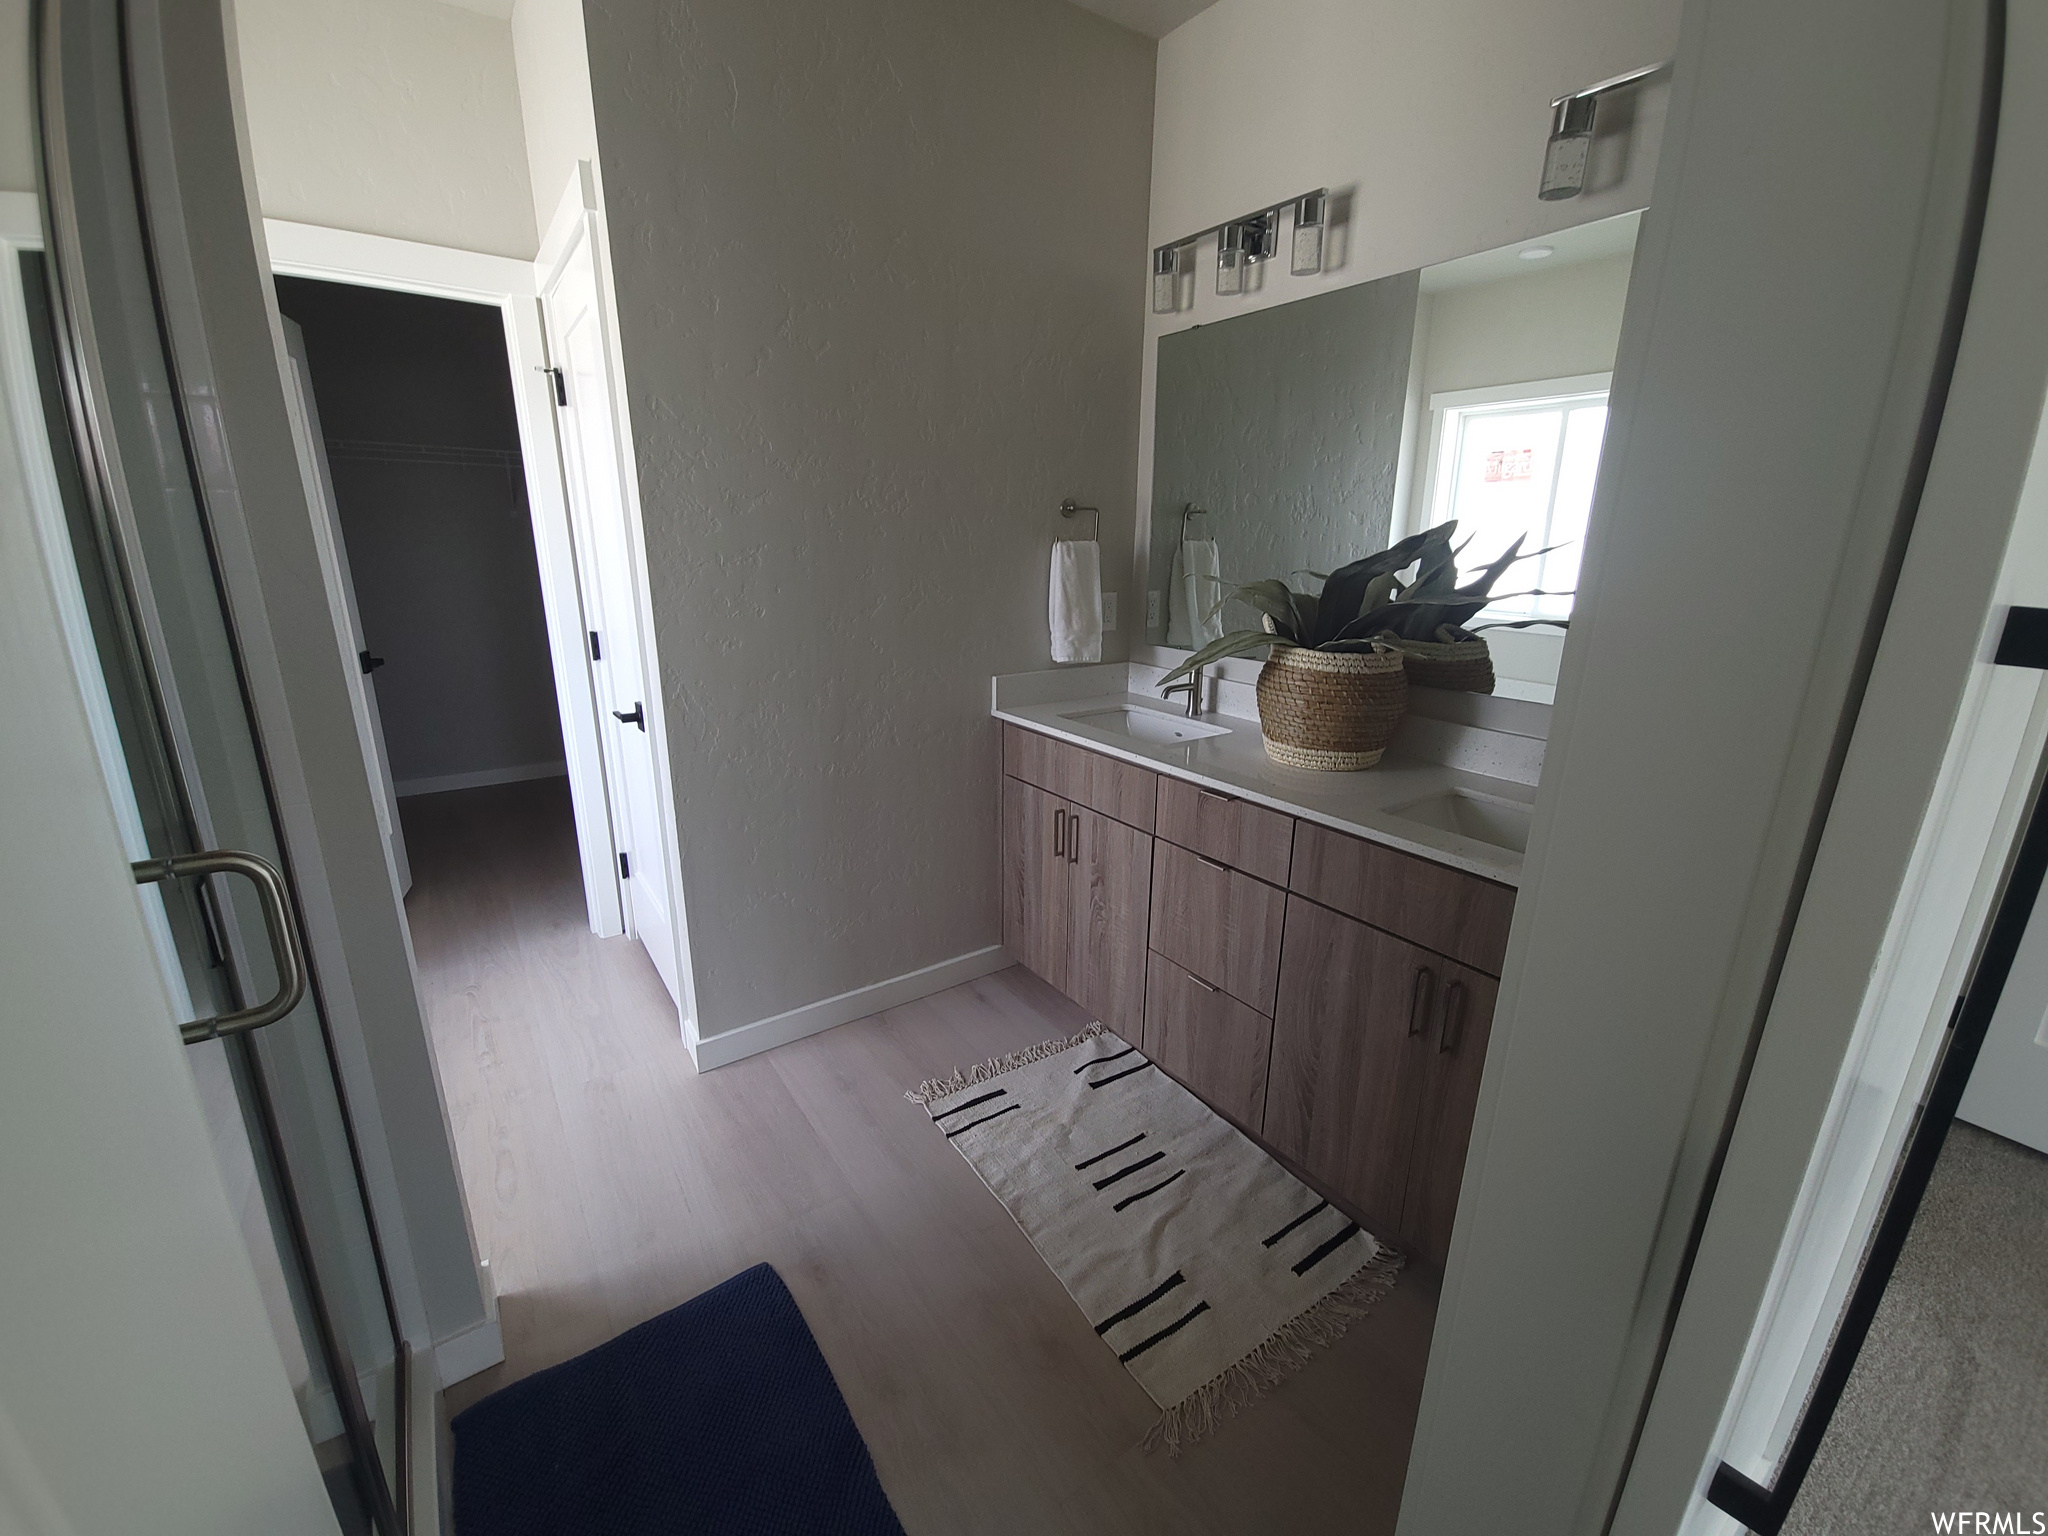 Bathroom featuring hardwood flooring, natural light, mirror, and his and hers large vanity